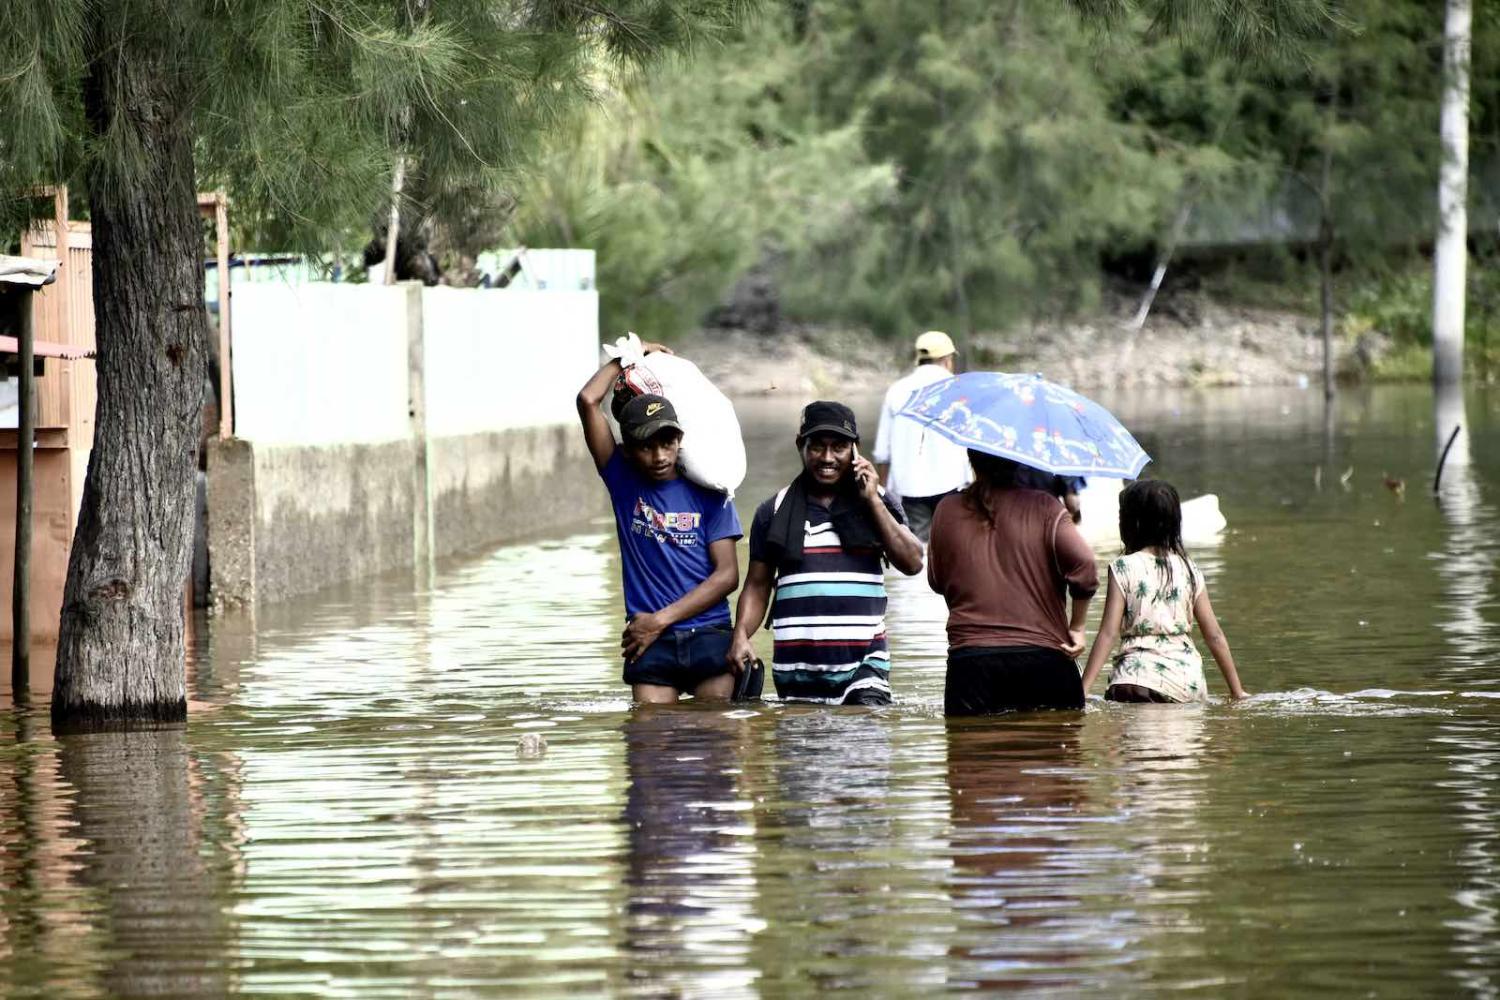 Dili residents wade through a flooded street on 9 April 2021 (Valentino Dariel Sousa/AFP via Getty Images)